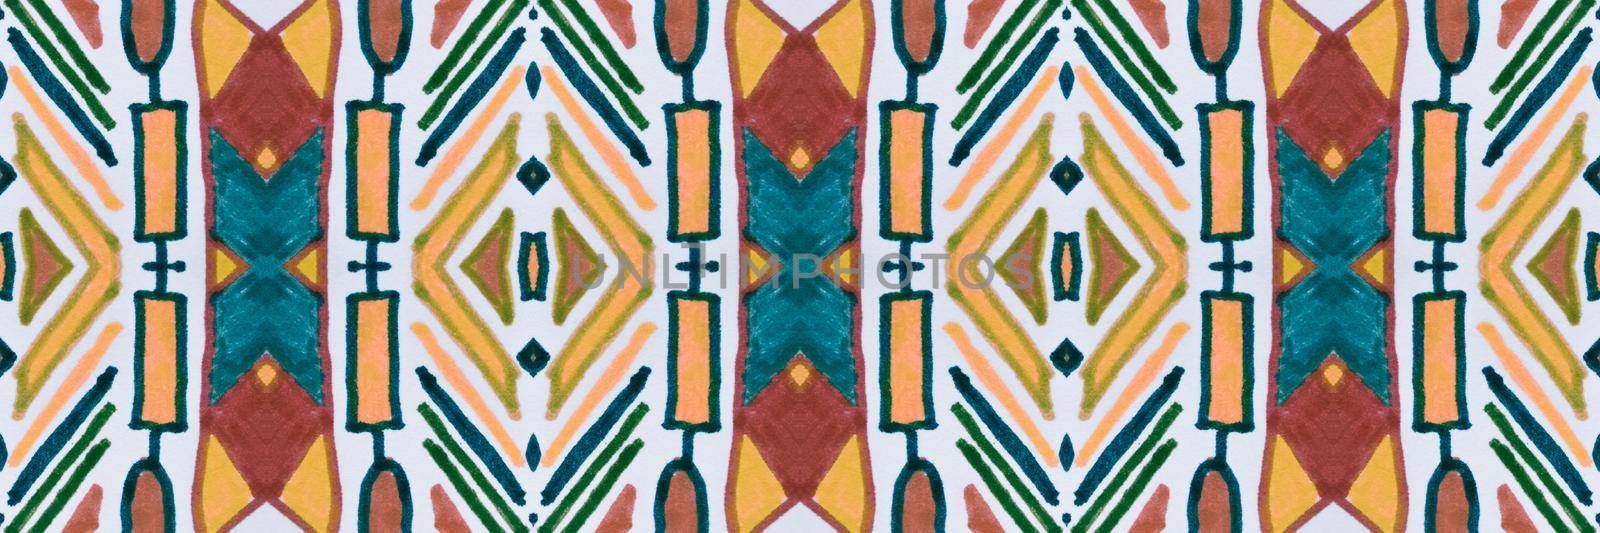 Geometric ethnic print. Grunge navajo texture. Abstract tribal illustration. Traditional american indian ornament. Seamless ethnic pattern. Mexican textile design. Hand drawn native background.